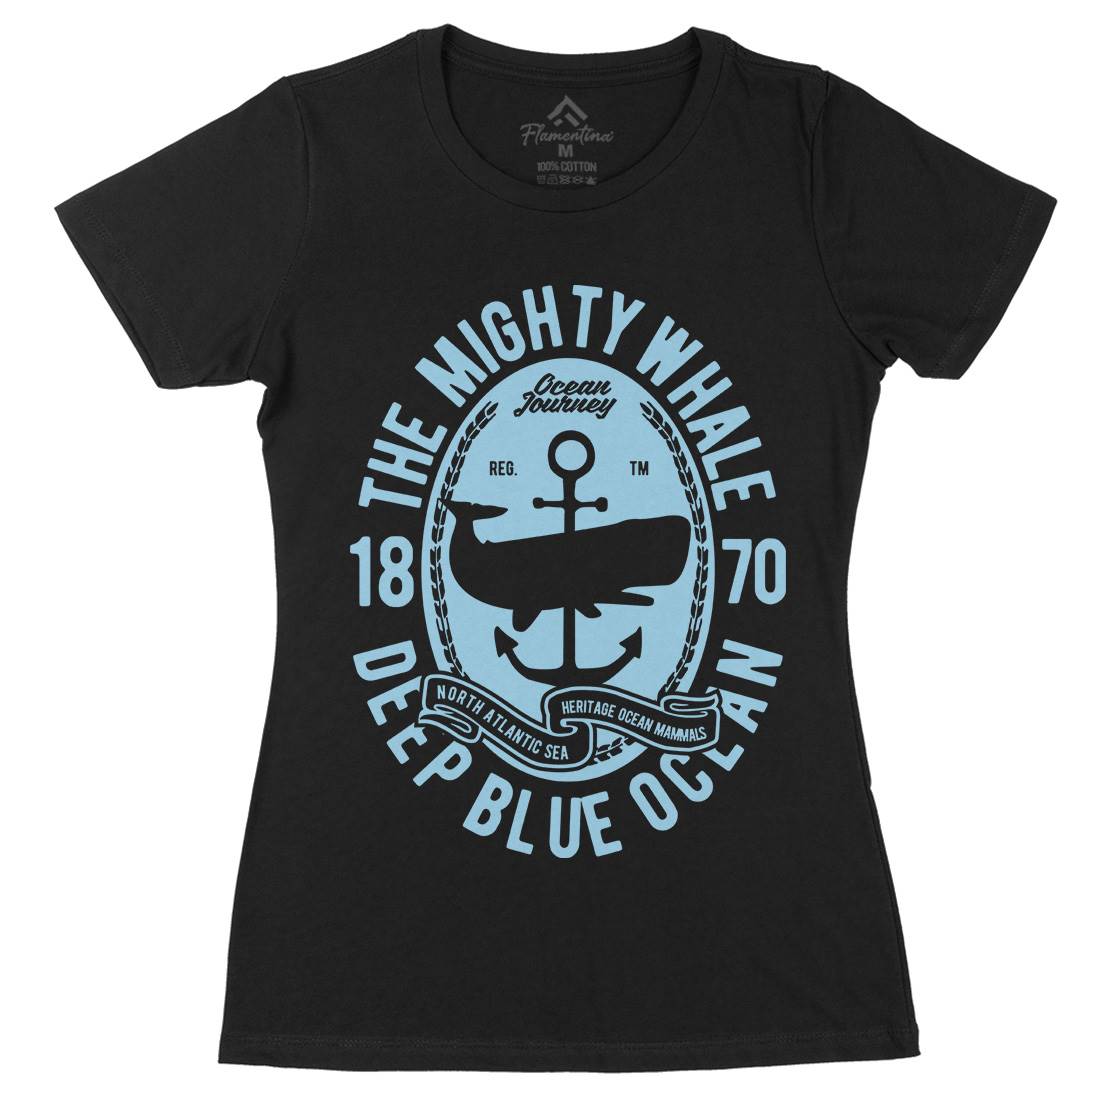 The Mighty Whale Womens Organic Crew Neck T-Shirt Navy B466